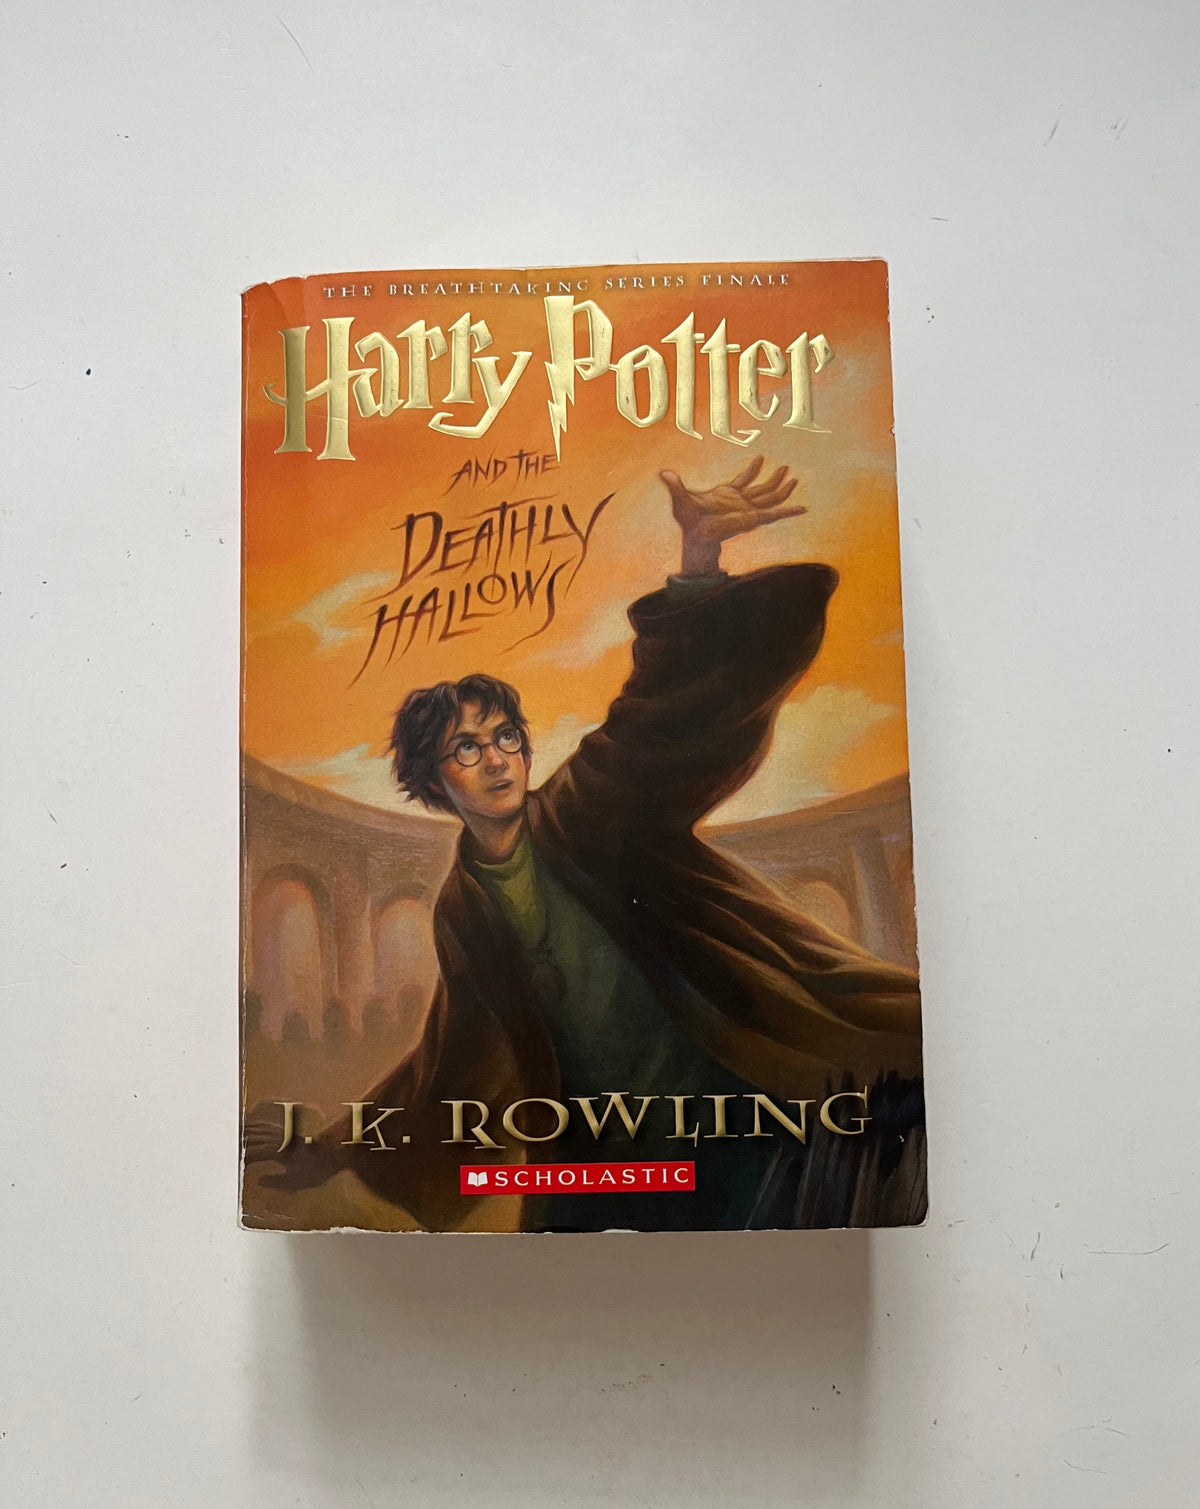 Harry Potter &amp; the Deathly Hallows by JK Rowling